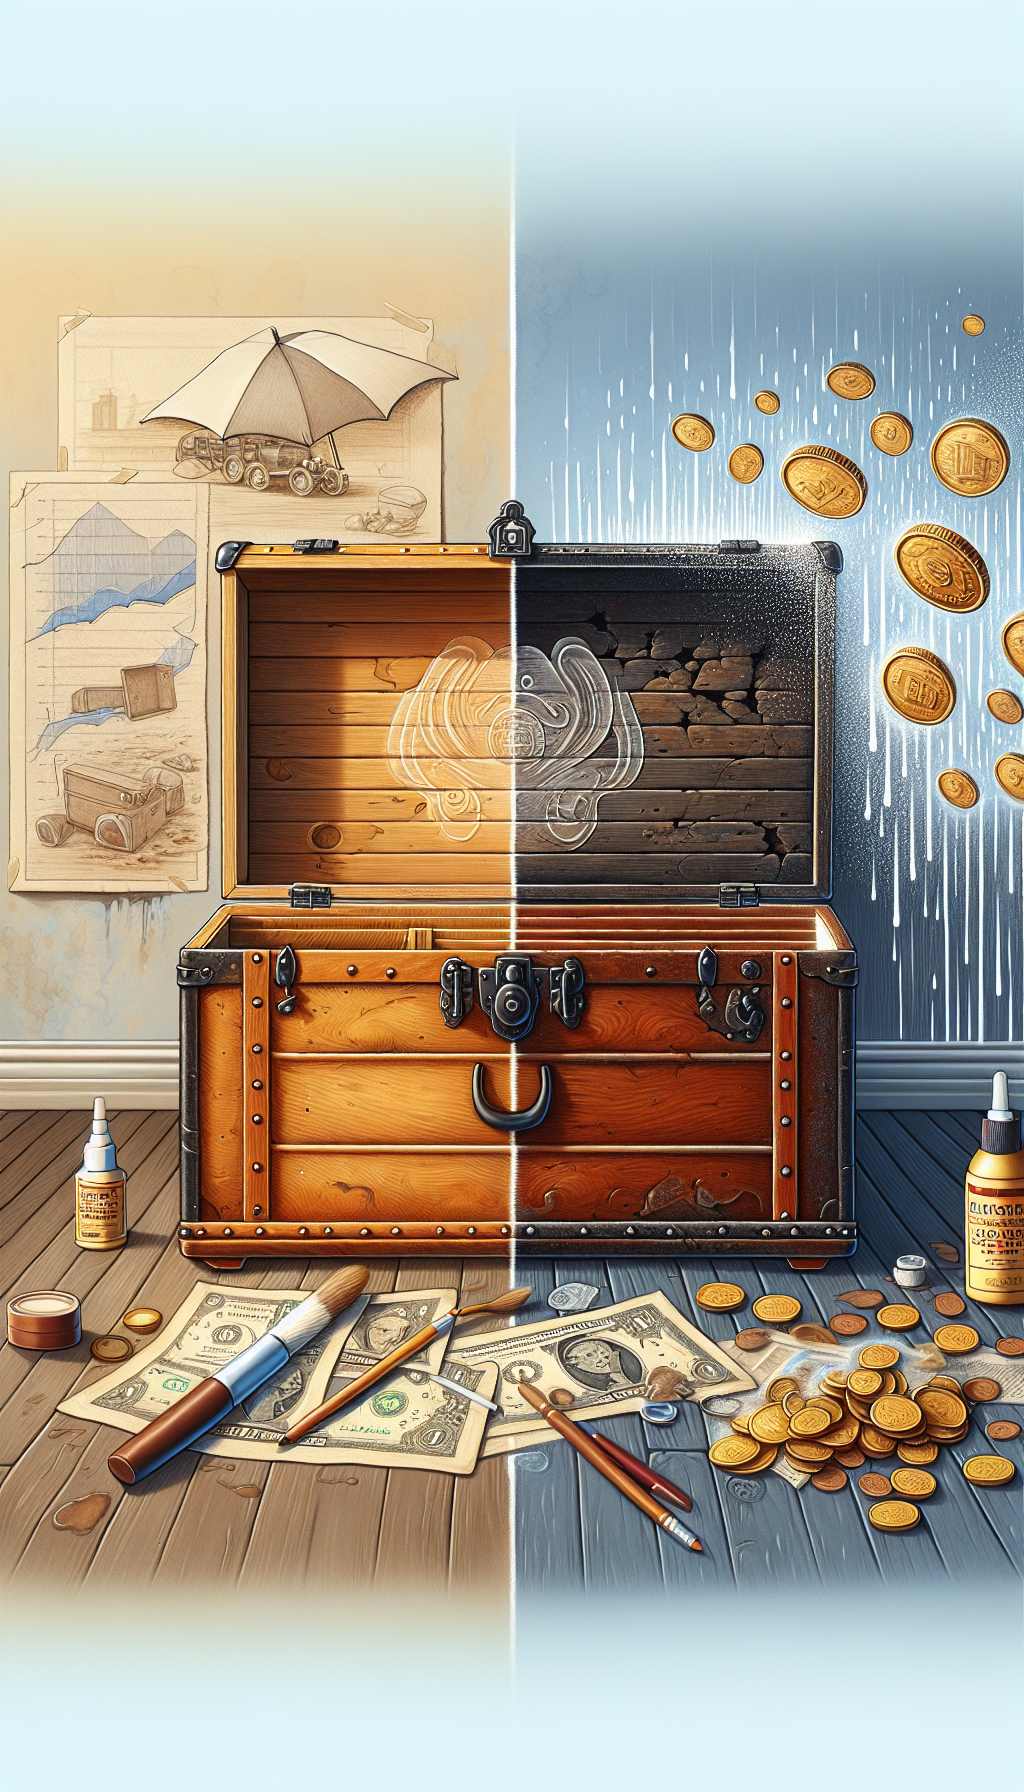 An illustration shows an antique steamer trunk, half treated with wood polish and leather conditioner, glowing with a restored finish, while the other half remains untouched and dull. Above, a transparent shield emblem symbolizes protection, and vintage coins rain down, turning into a graph that indicates increasing value. Styles transition from realistic on the restored side to sketch-like on the untreated side.